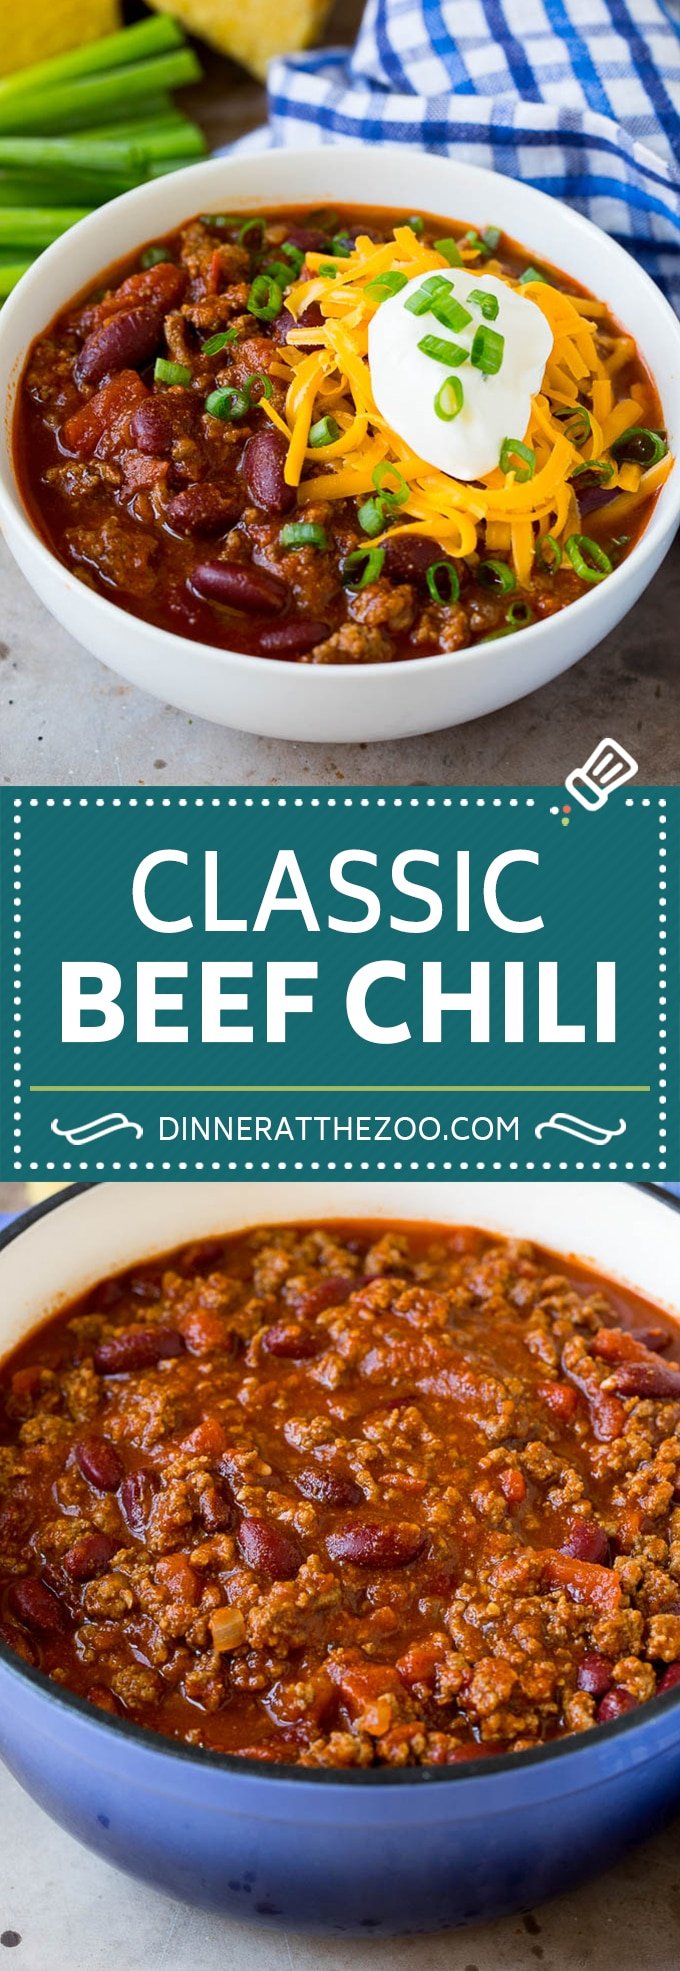 Beef Chili Recipe Dinner At The Zoo